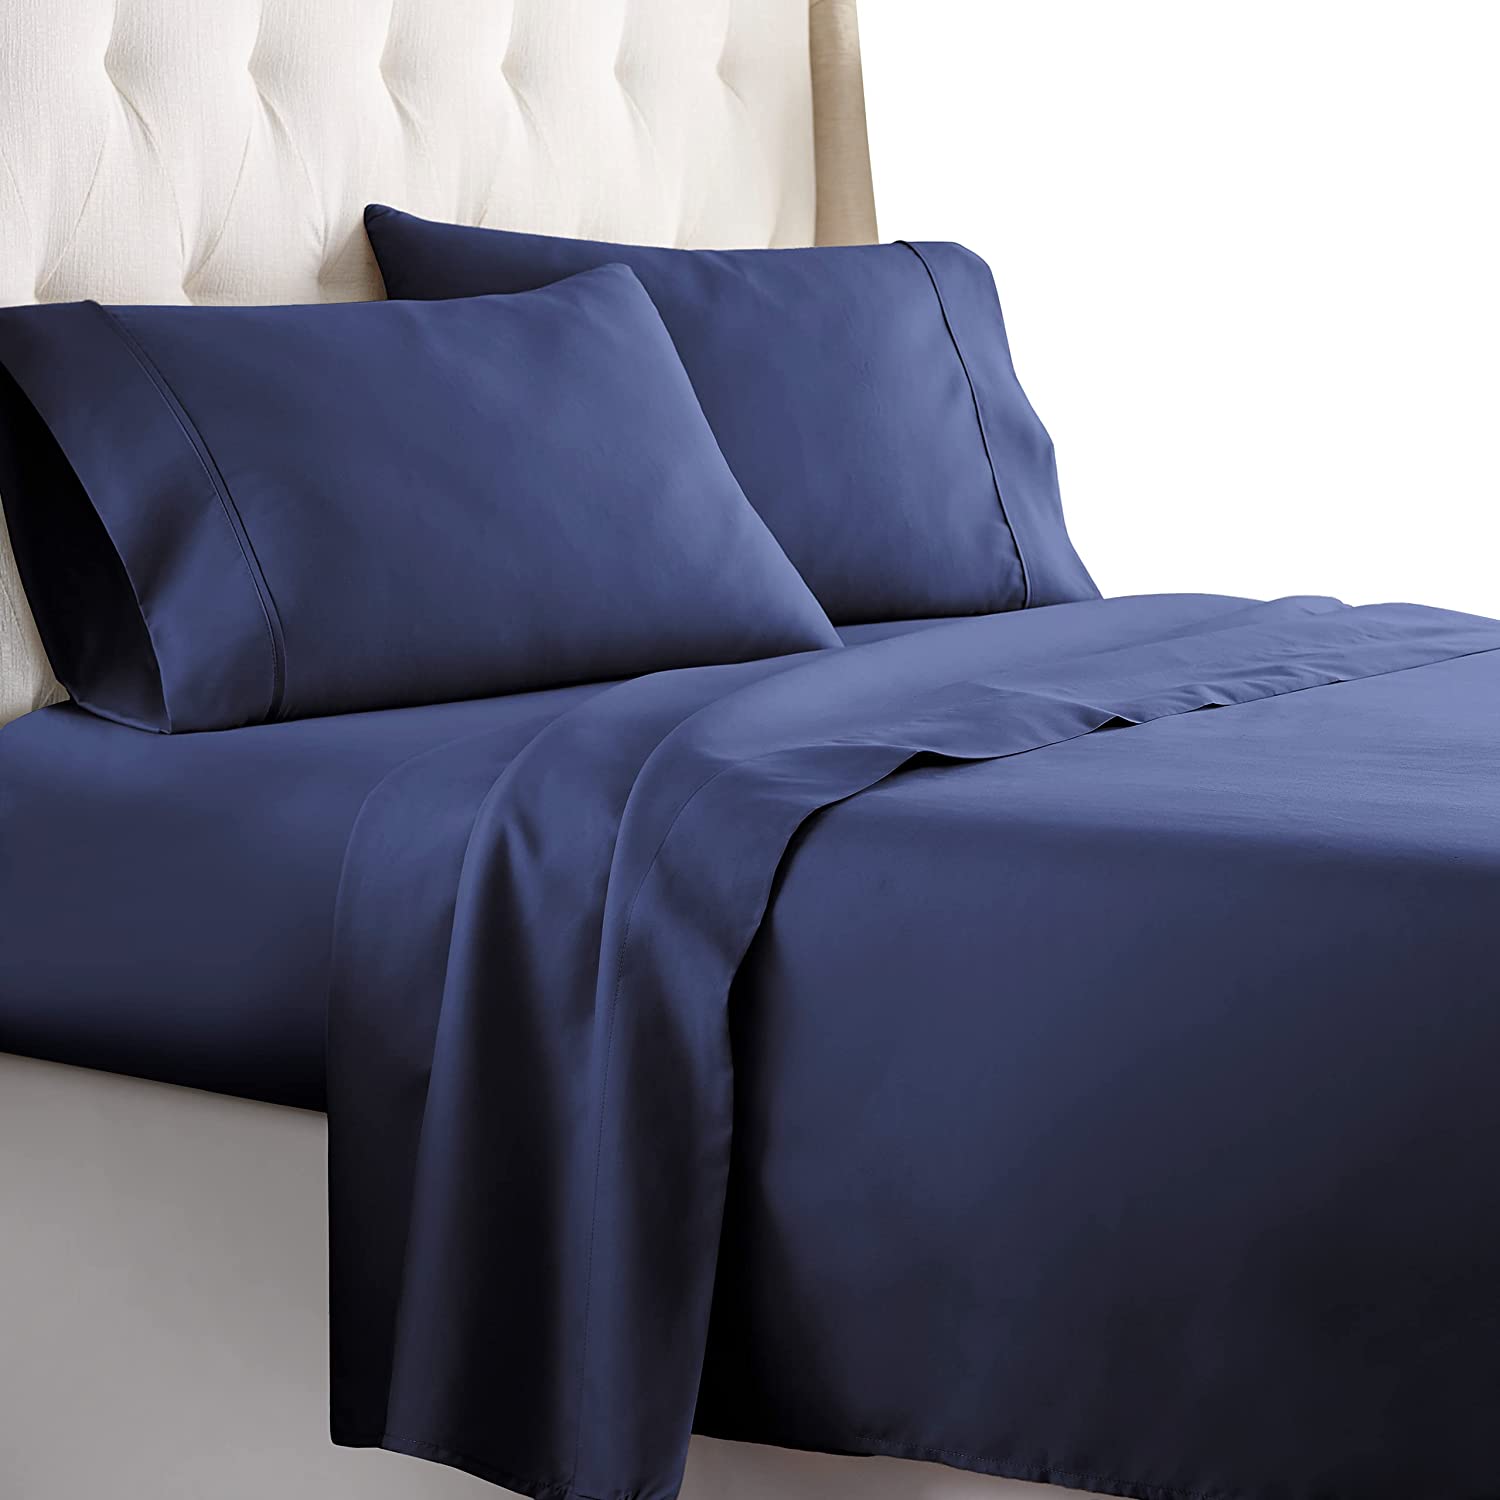 Buy 1000 Thread Count Navy Blue Sheet set Egyptian cotton at- Egyptianhomelinens.com